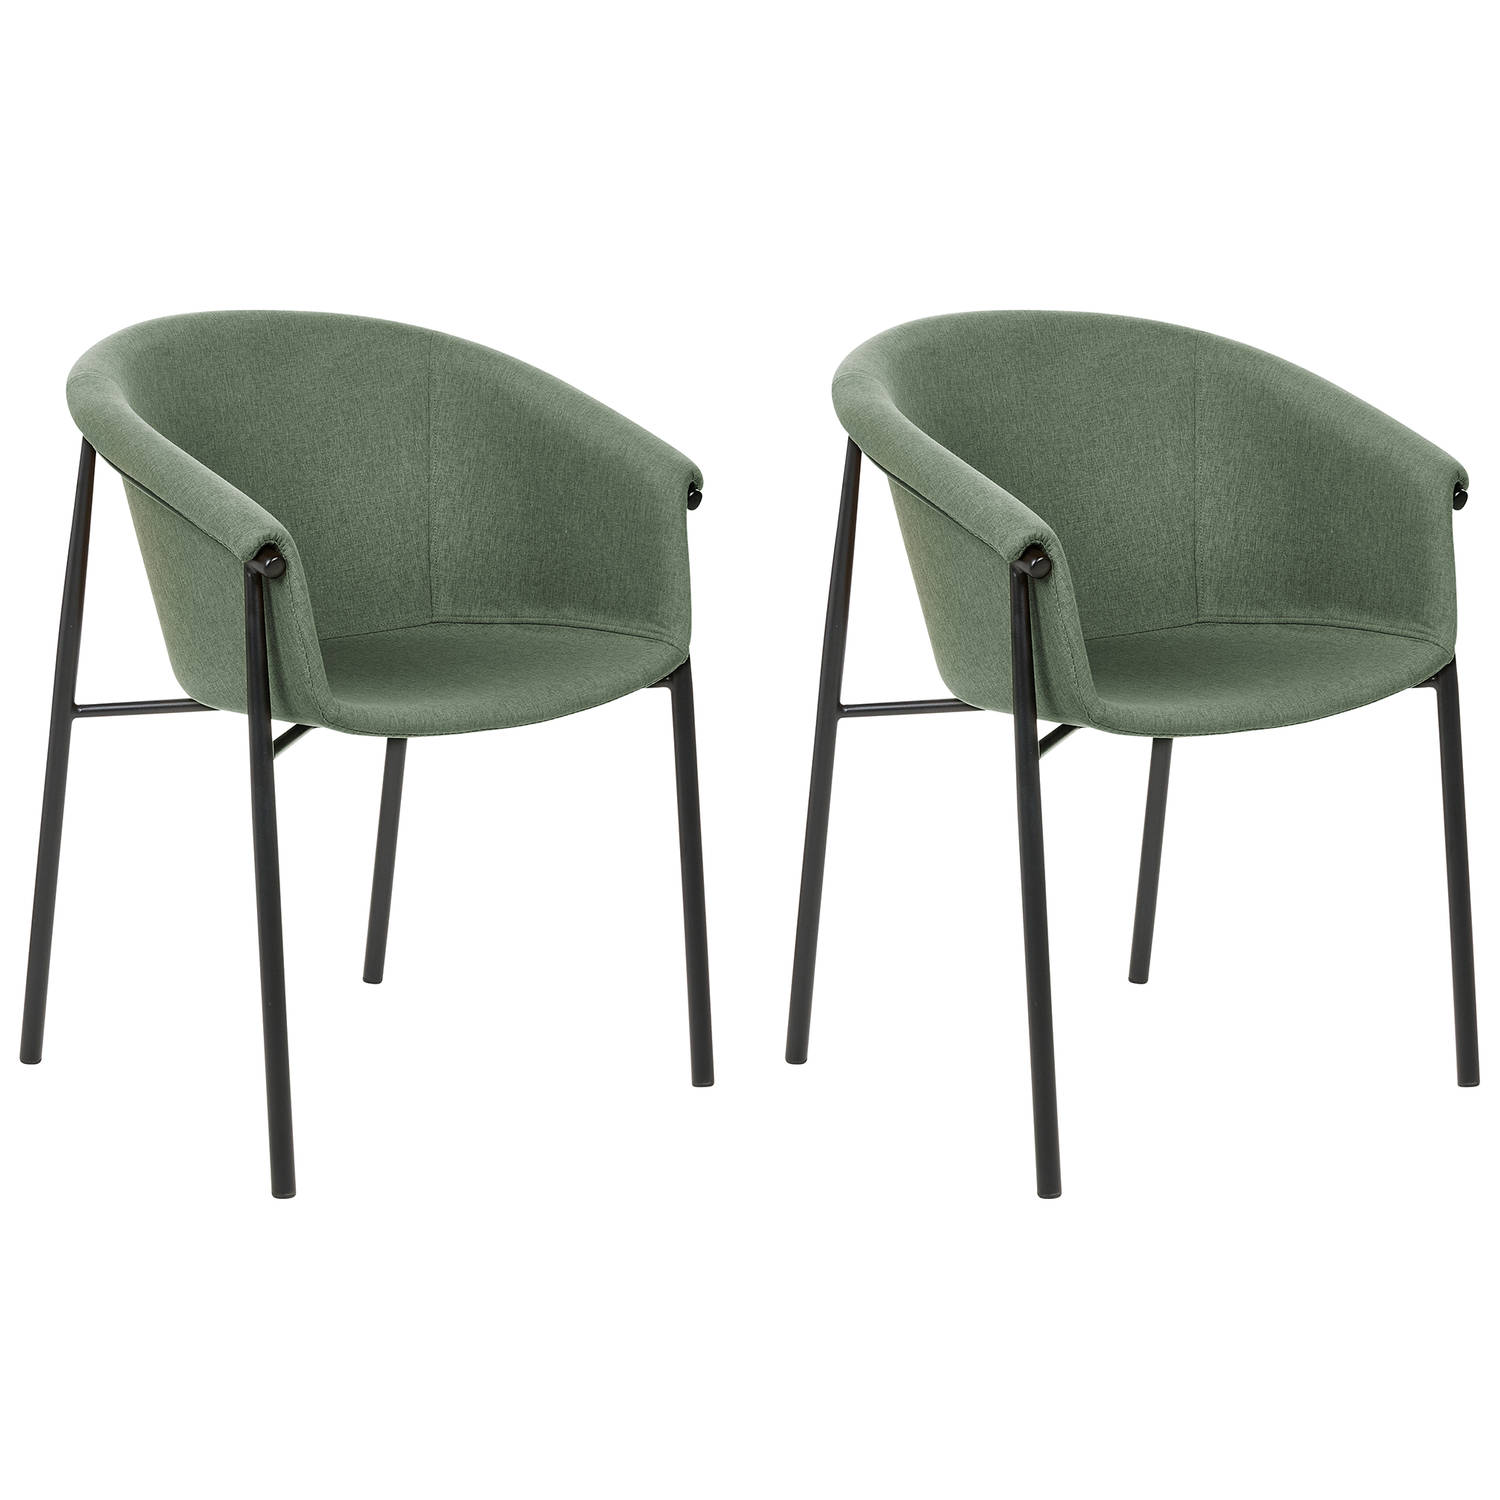 Beliani AMES - Set of 2 Chairs - Groen - Polyester